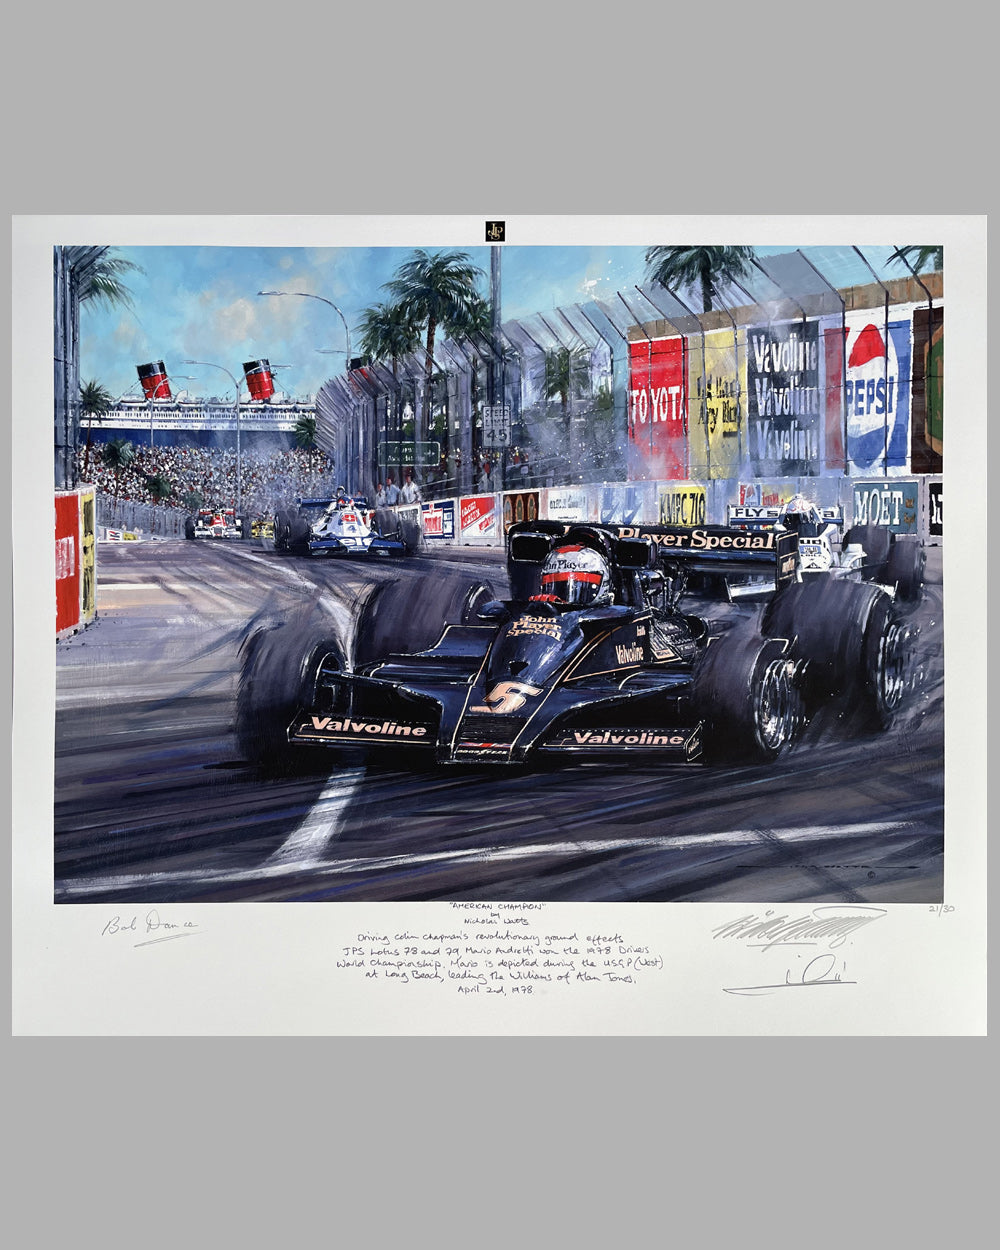 American Champion print by Nicholas Watts, hand autographed by Andretti